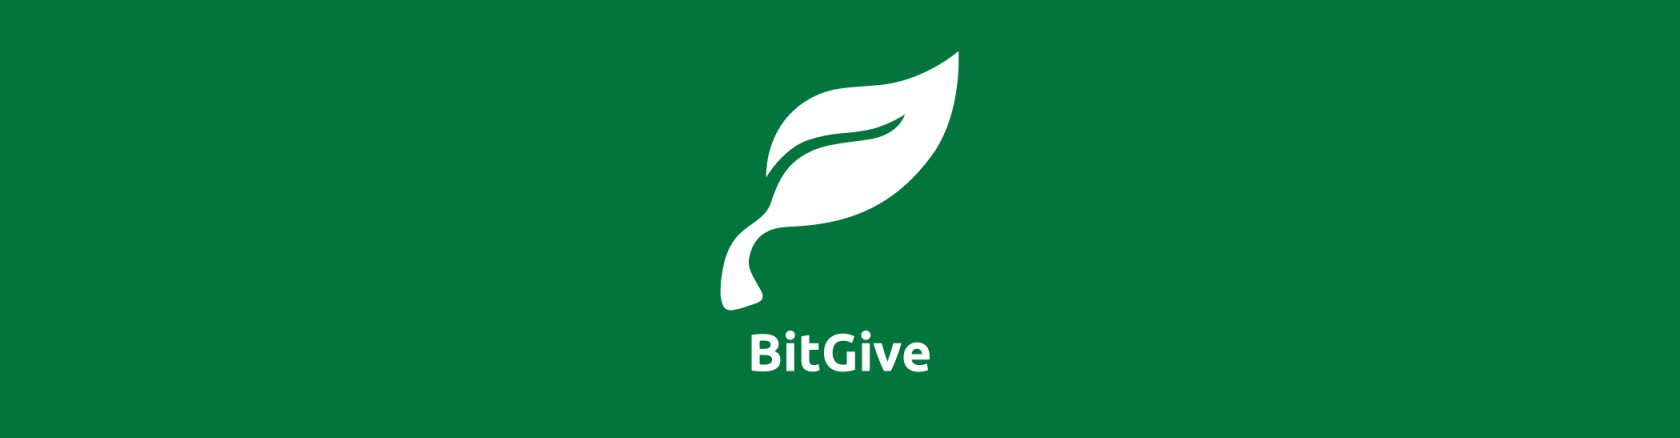 Featured Post: Connie Gallippi of Bitgive